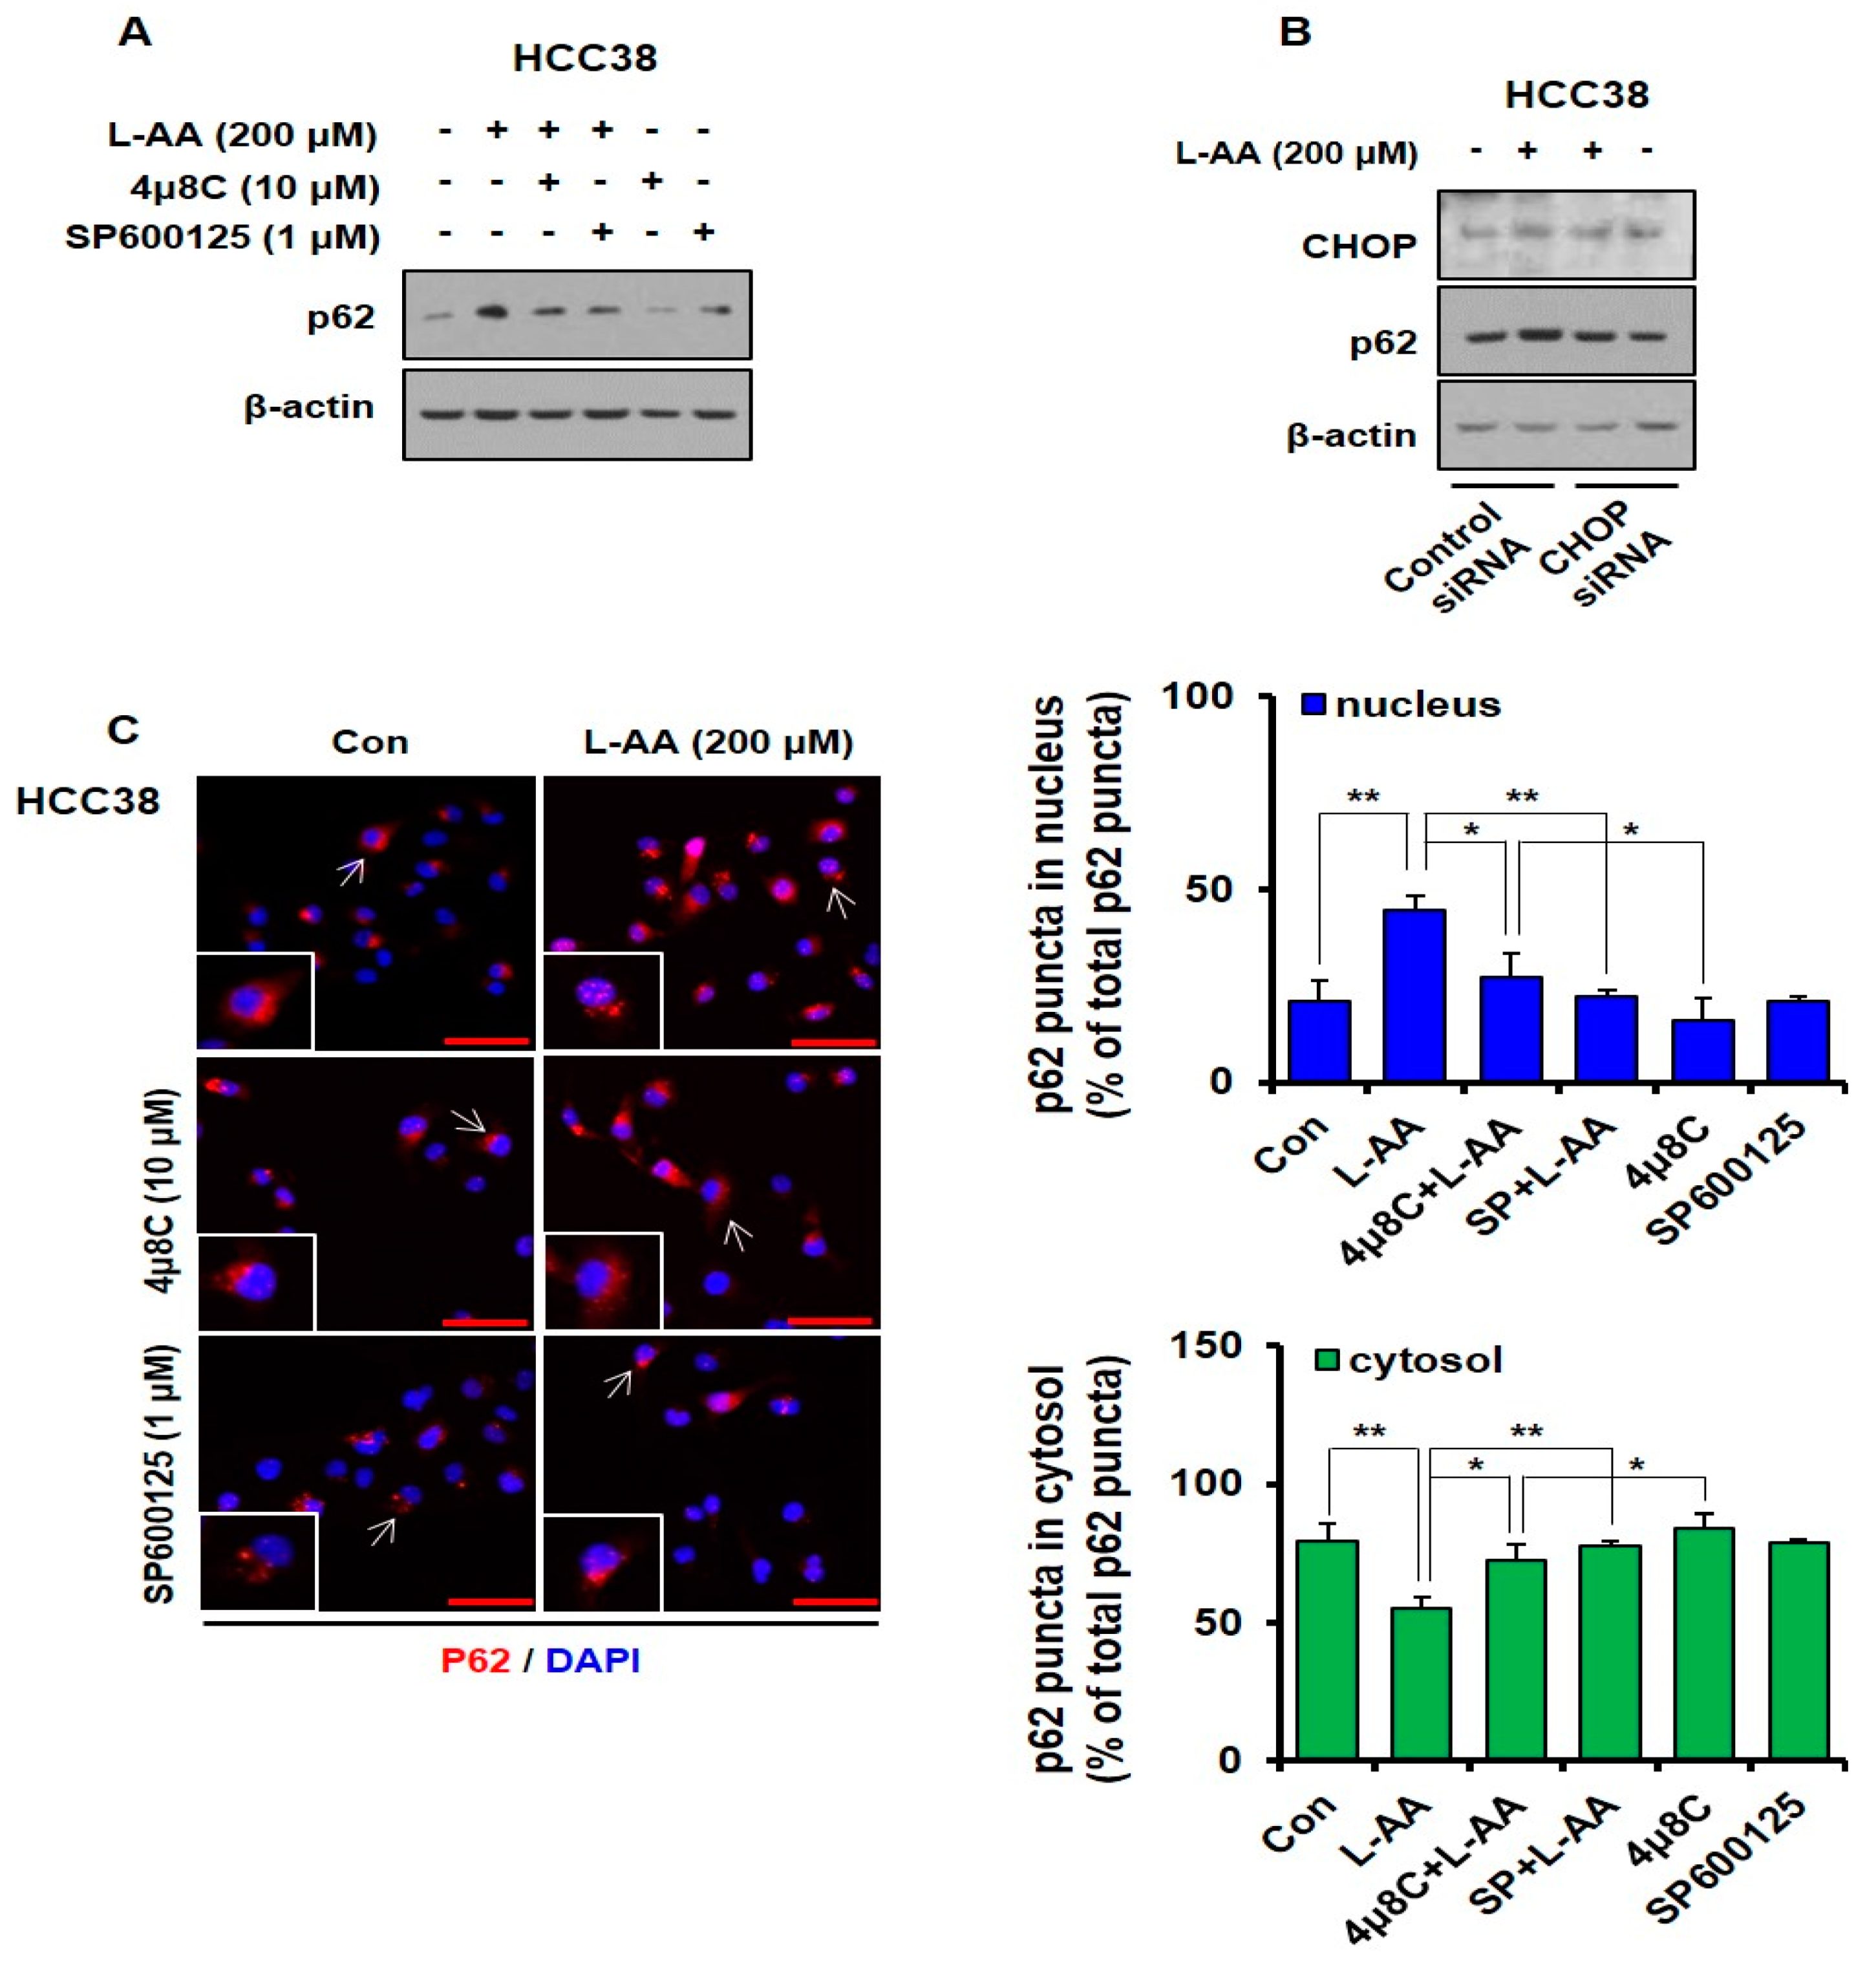 Nutrients Free Full Text L Ascorbic Acid Inhibits Breast Cancer Growth By Inducing Ire Jnk Chop Related Endoplasmic Reticulum Stress Mediated P62 Sqstm1 Accumulation In The Nucleus Html